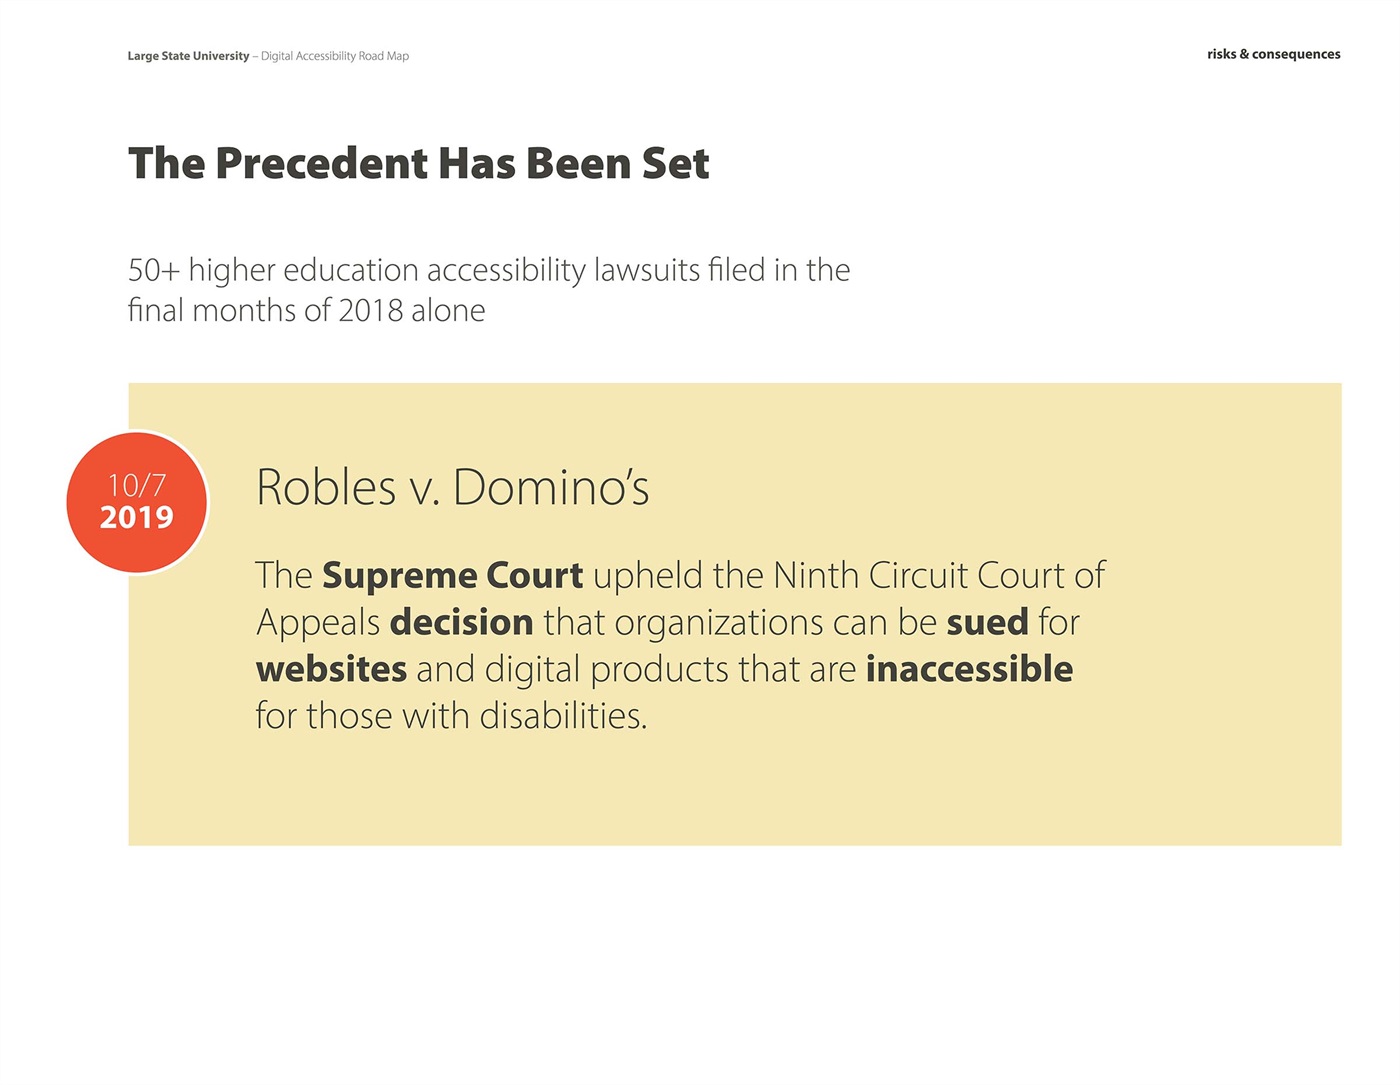 Page from the Digital Accessibility Roadmap showing the precedent set by Robles v. Domino's 2019 that organizations can be sued for inaccessible websites and digital products.